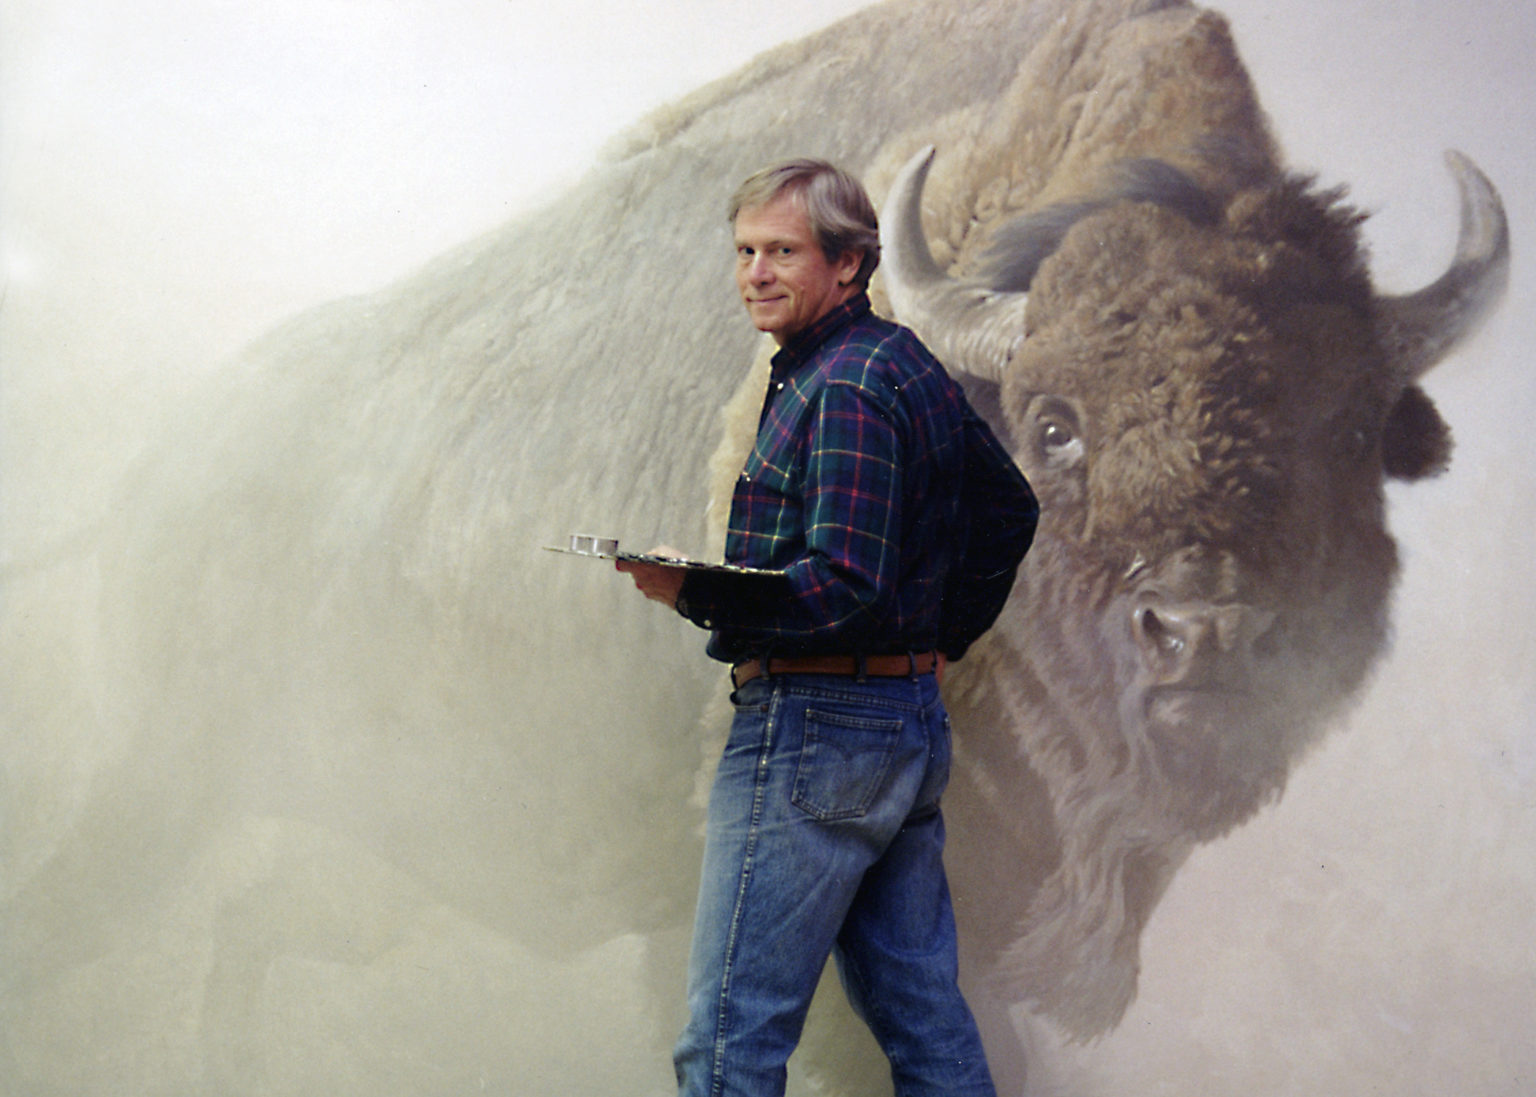 A conversation with iconic artist Robert Bateman The Narwhal